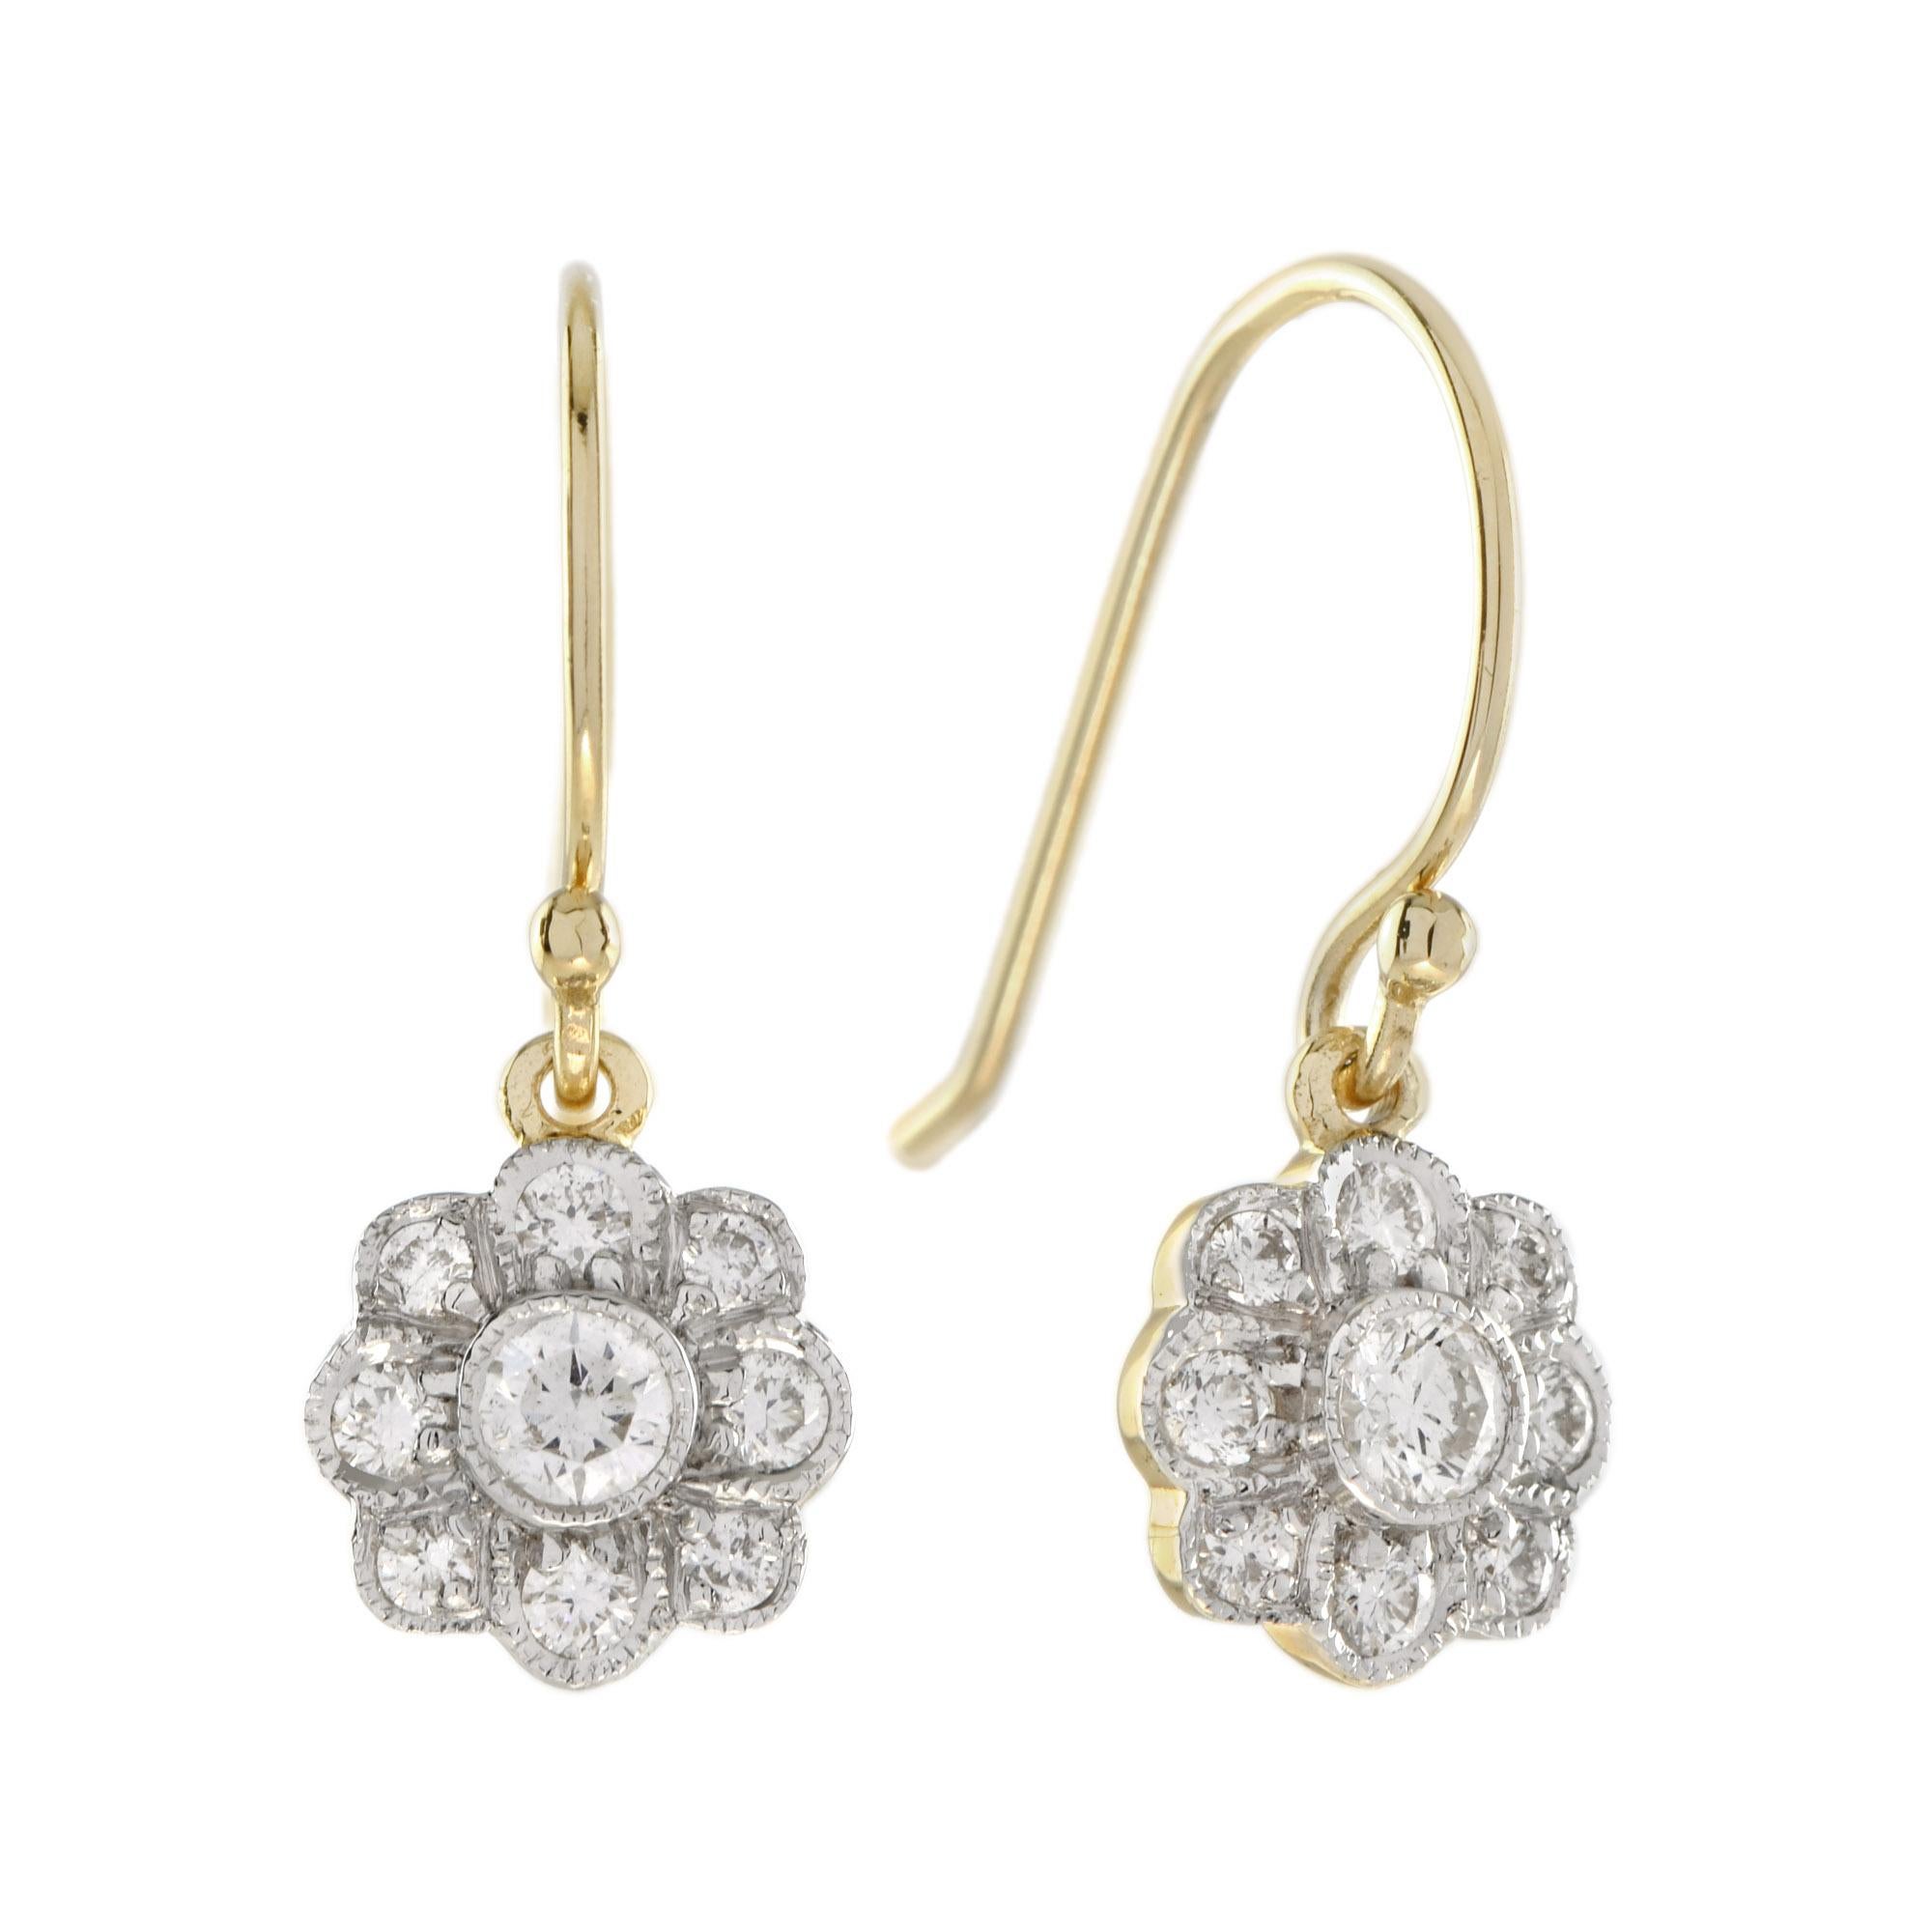 A stunning and beautiful design of the iconic Art Deco flower drop earrings, featuring round cut and striking diamonds beautifully set into 14k yellow gold with white rhodium plating on top.

Information
Metal: 14K White Gold
Width: 21 mm.
Length: 8